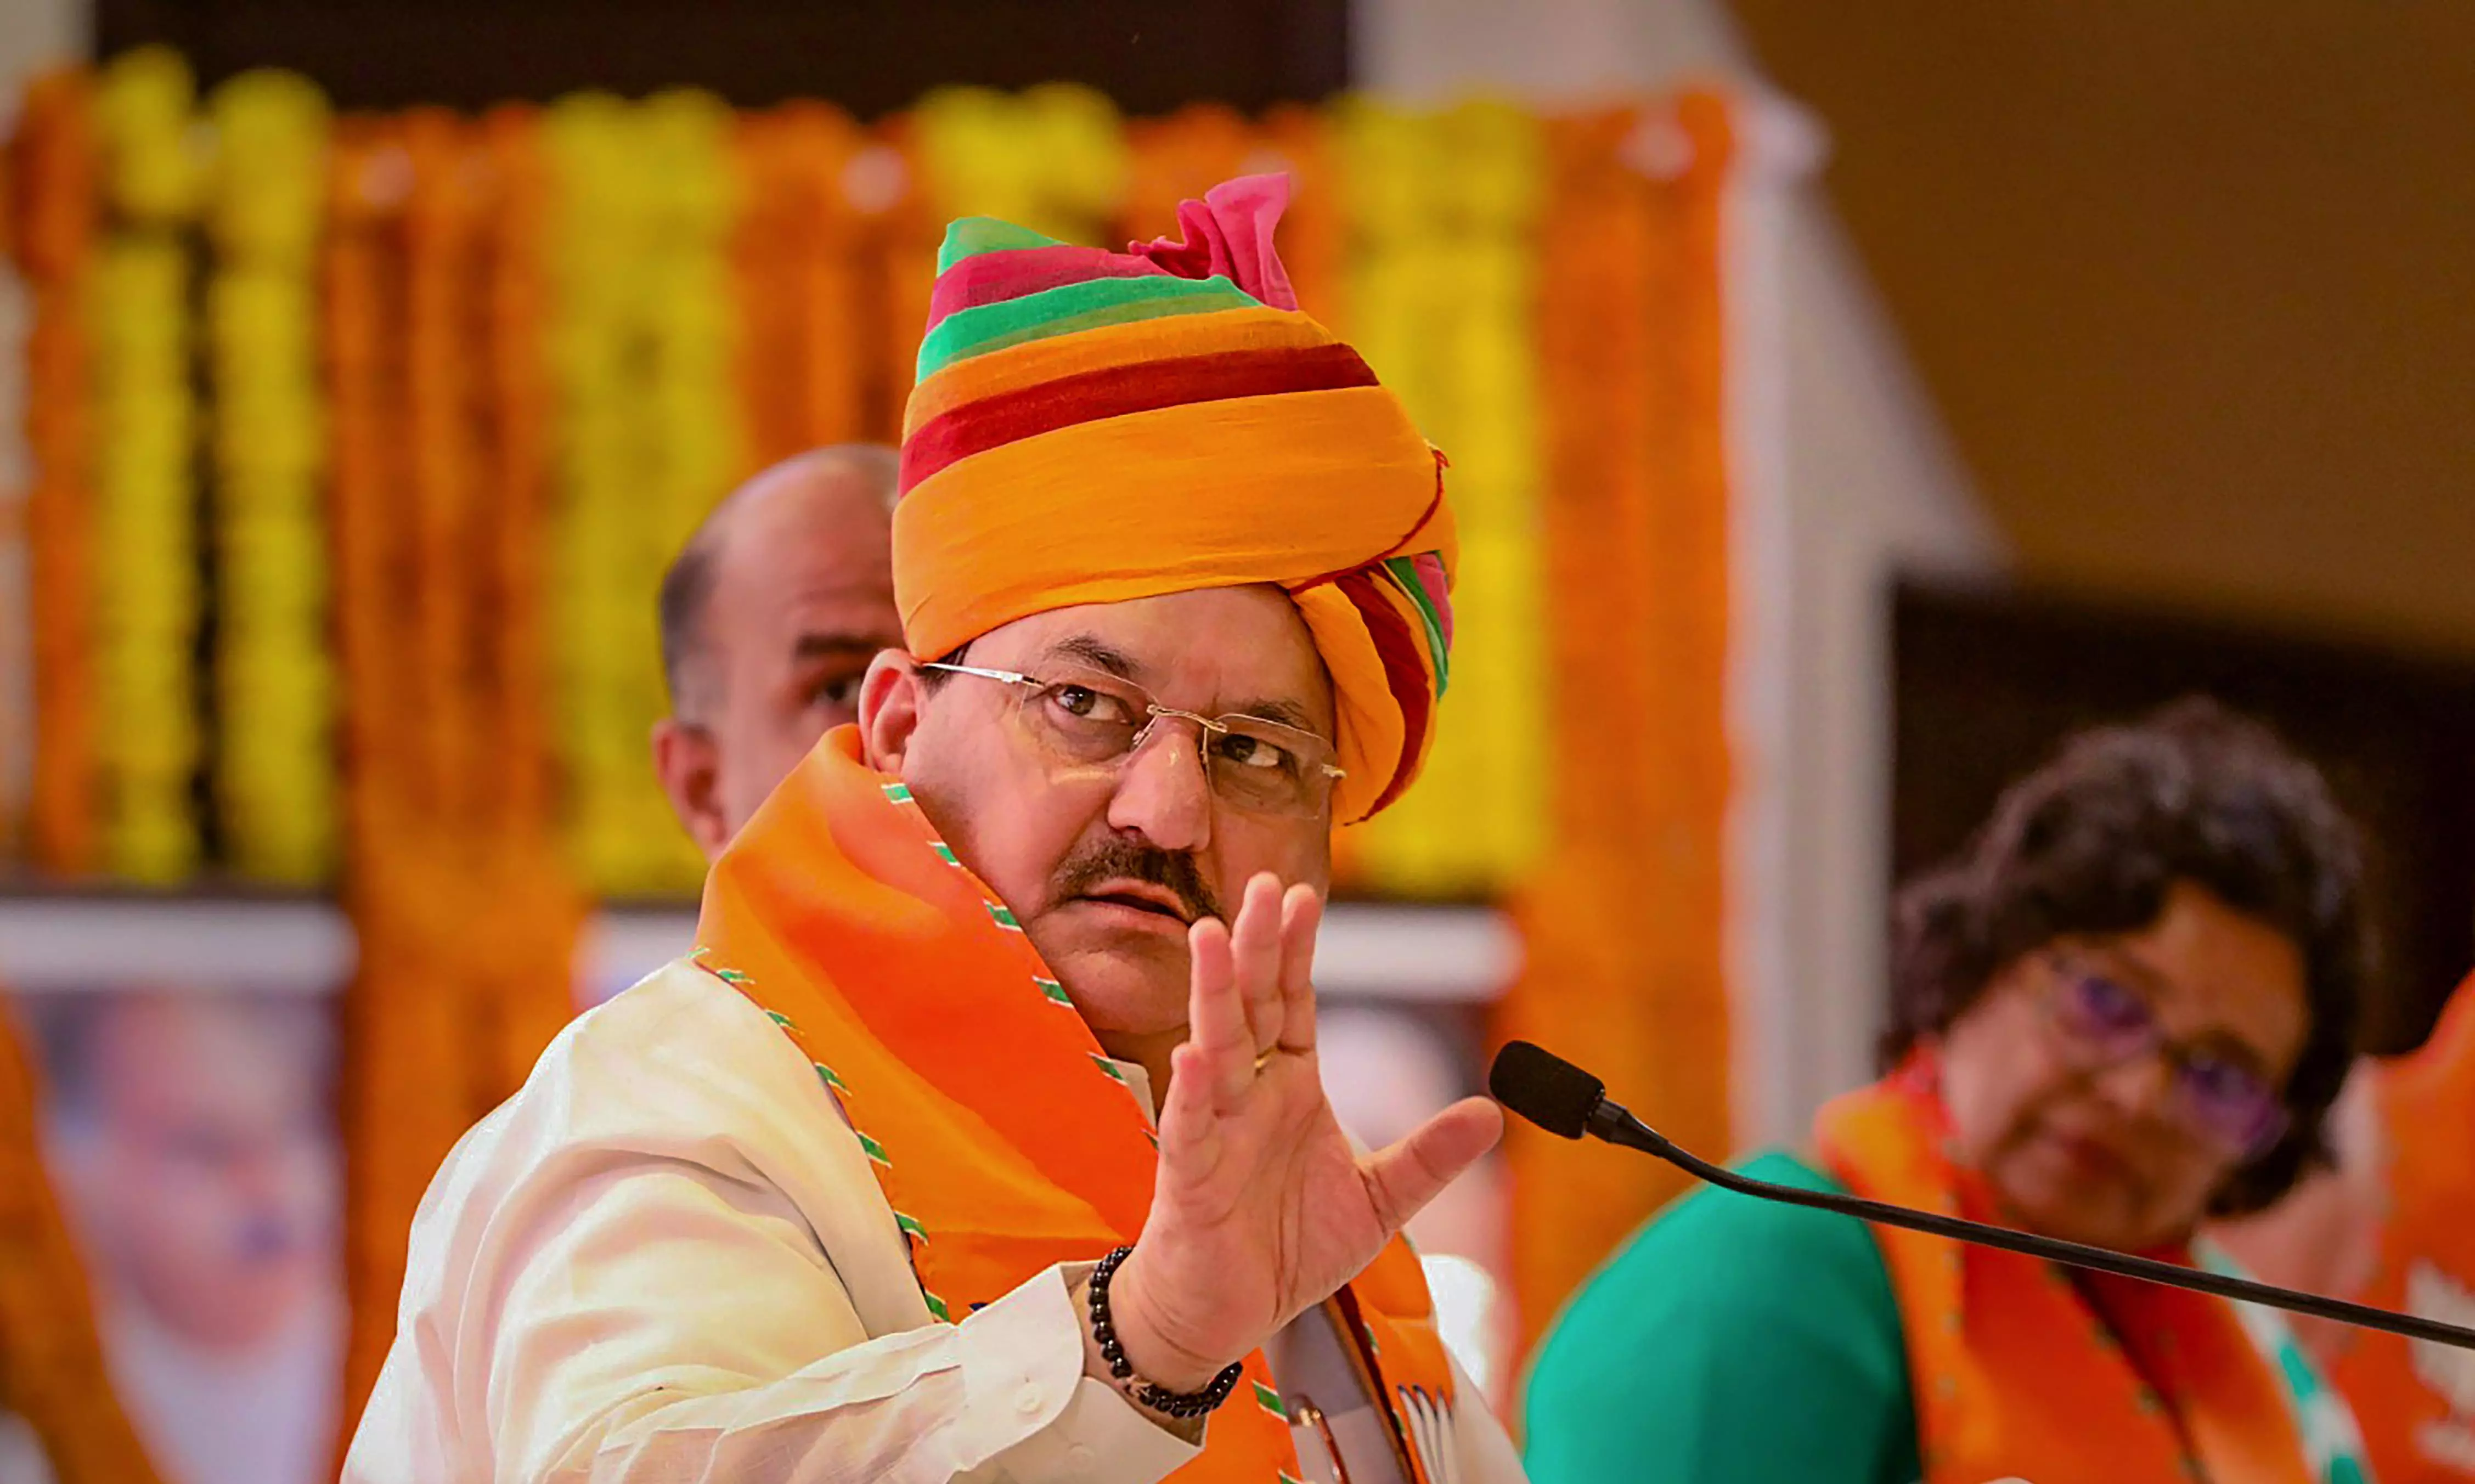 Rajasthan polls: Rebellion over candidate selection has BJP in trouble